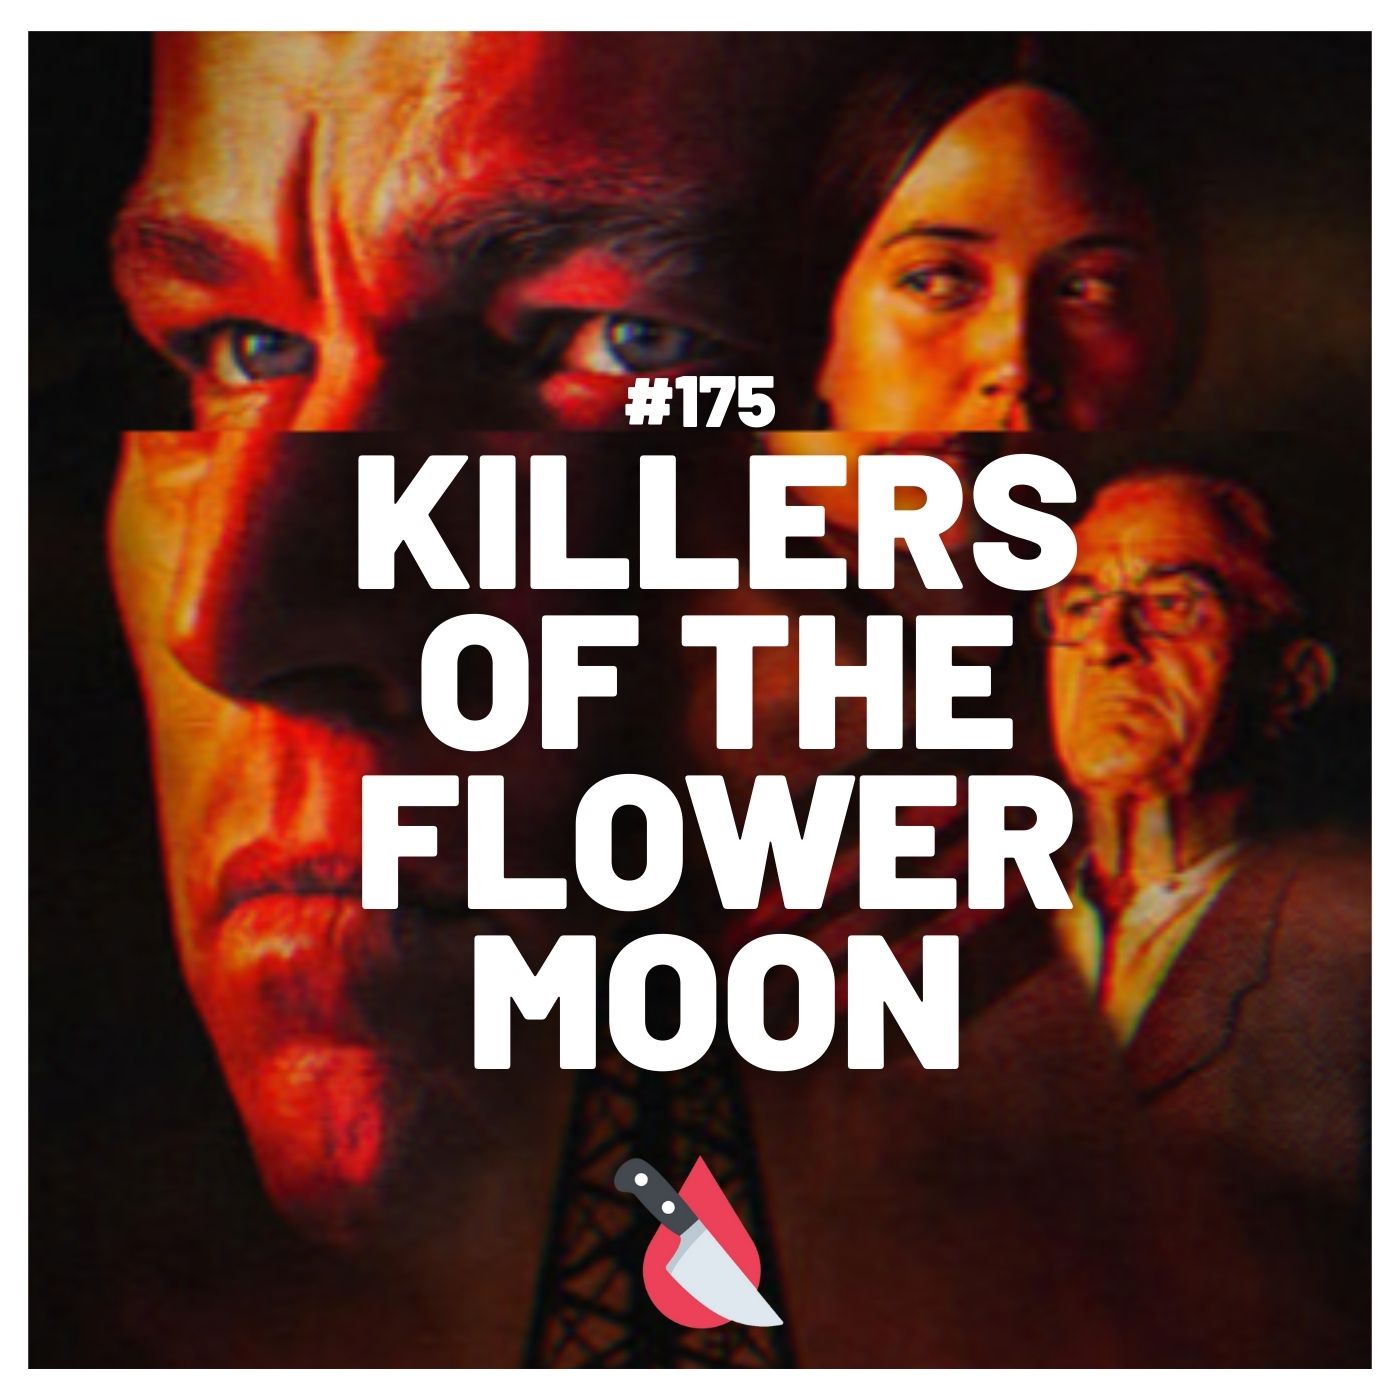 #175 - Killers of the Flower Moon